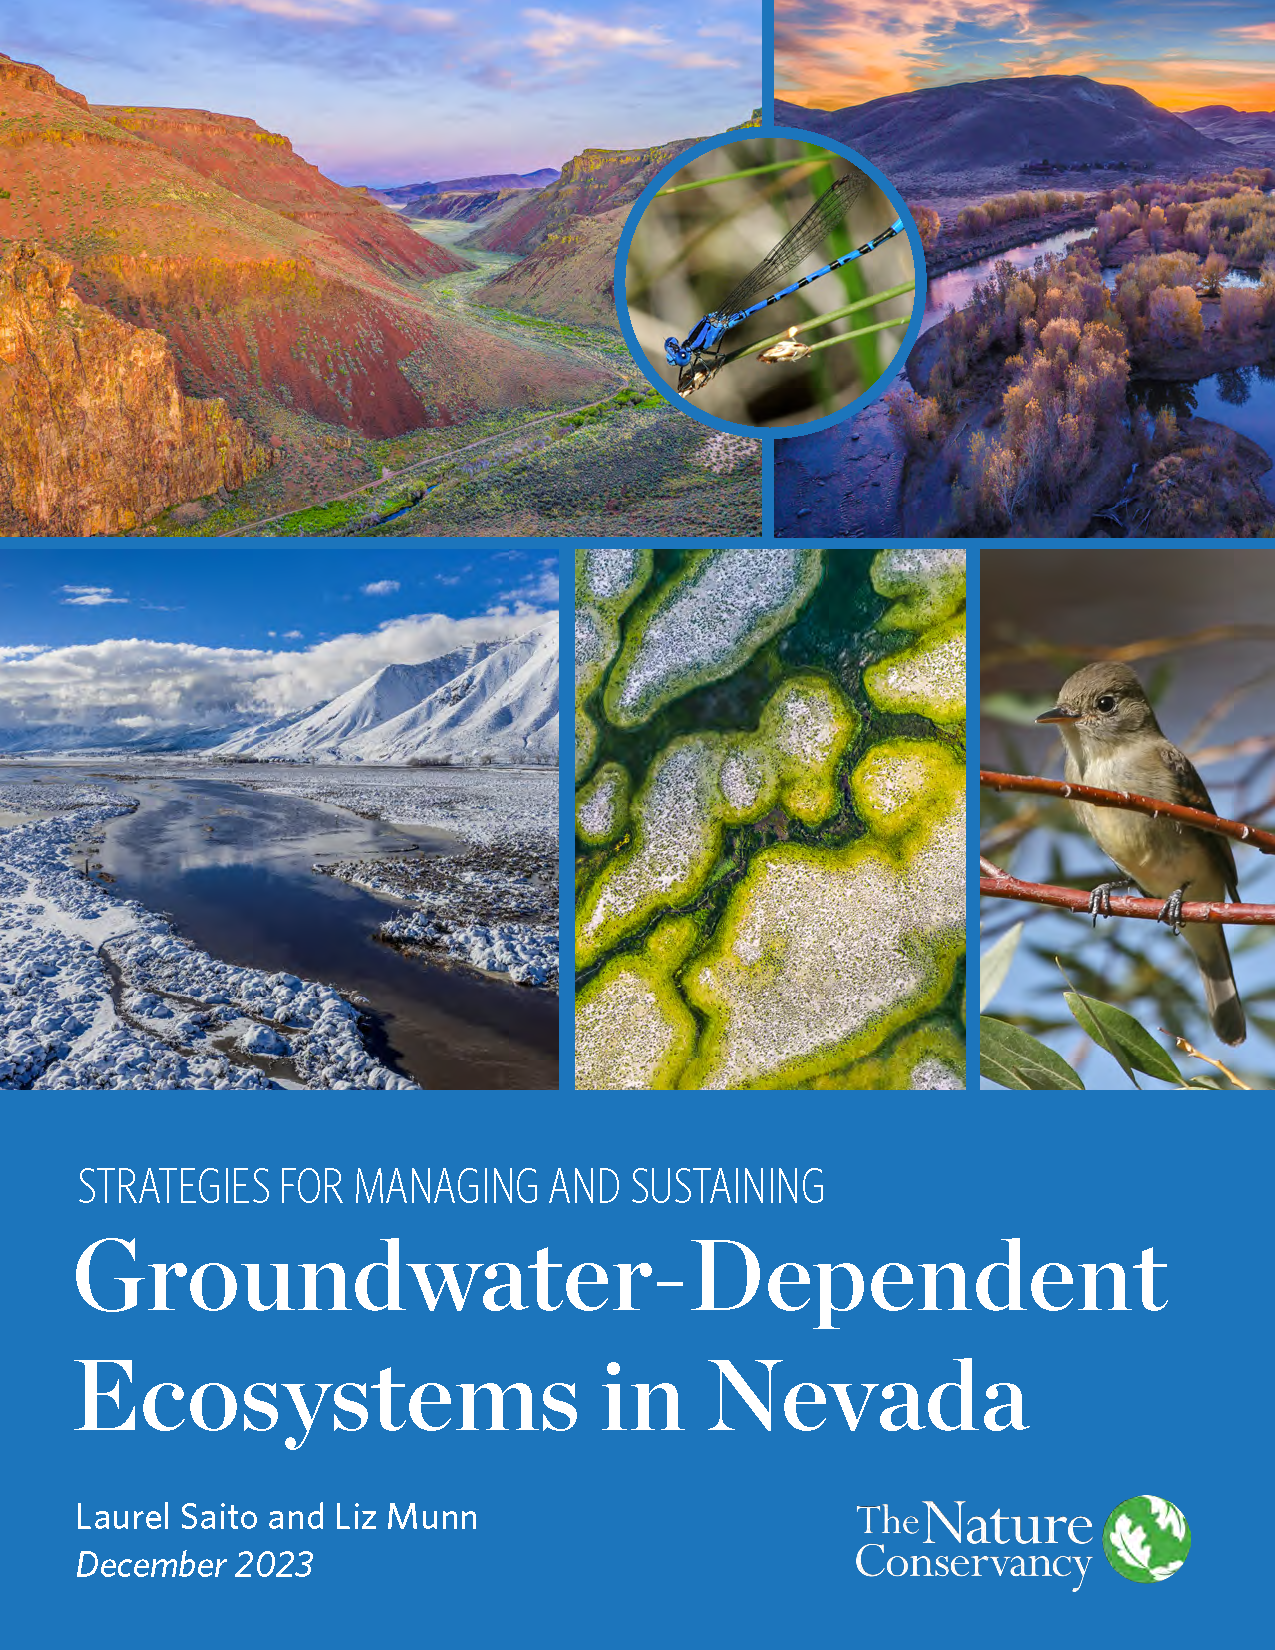 Nevada Strategies for GDEs report